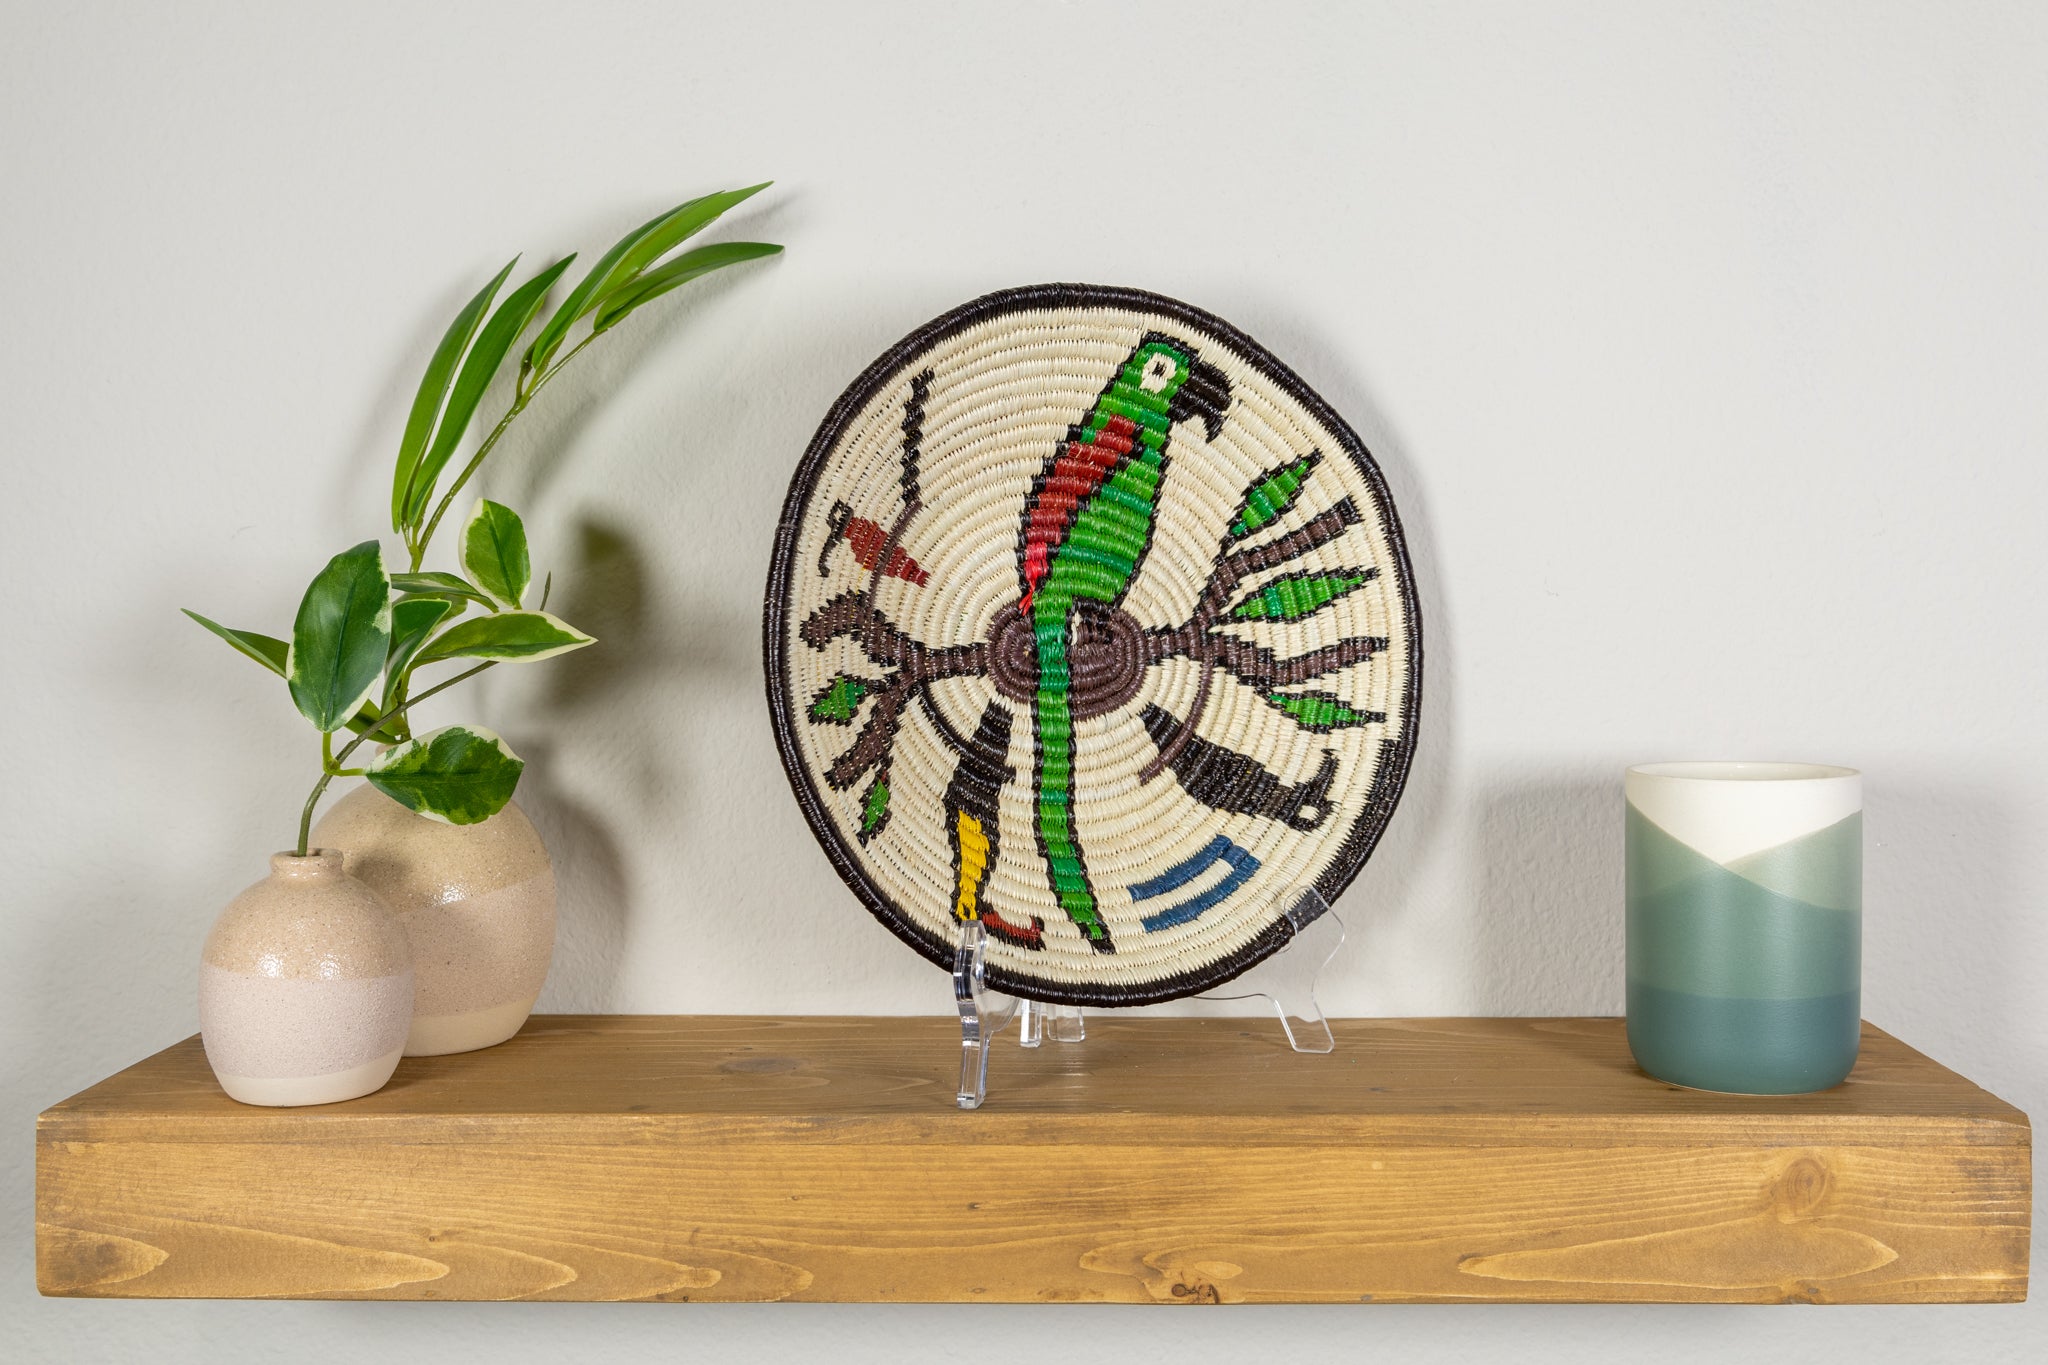 Green Parrot on Branch Basket Plate